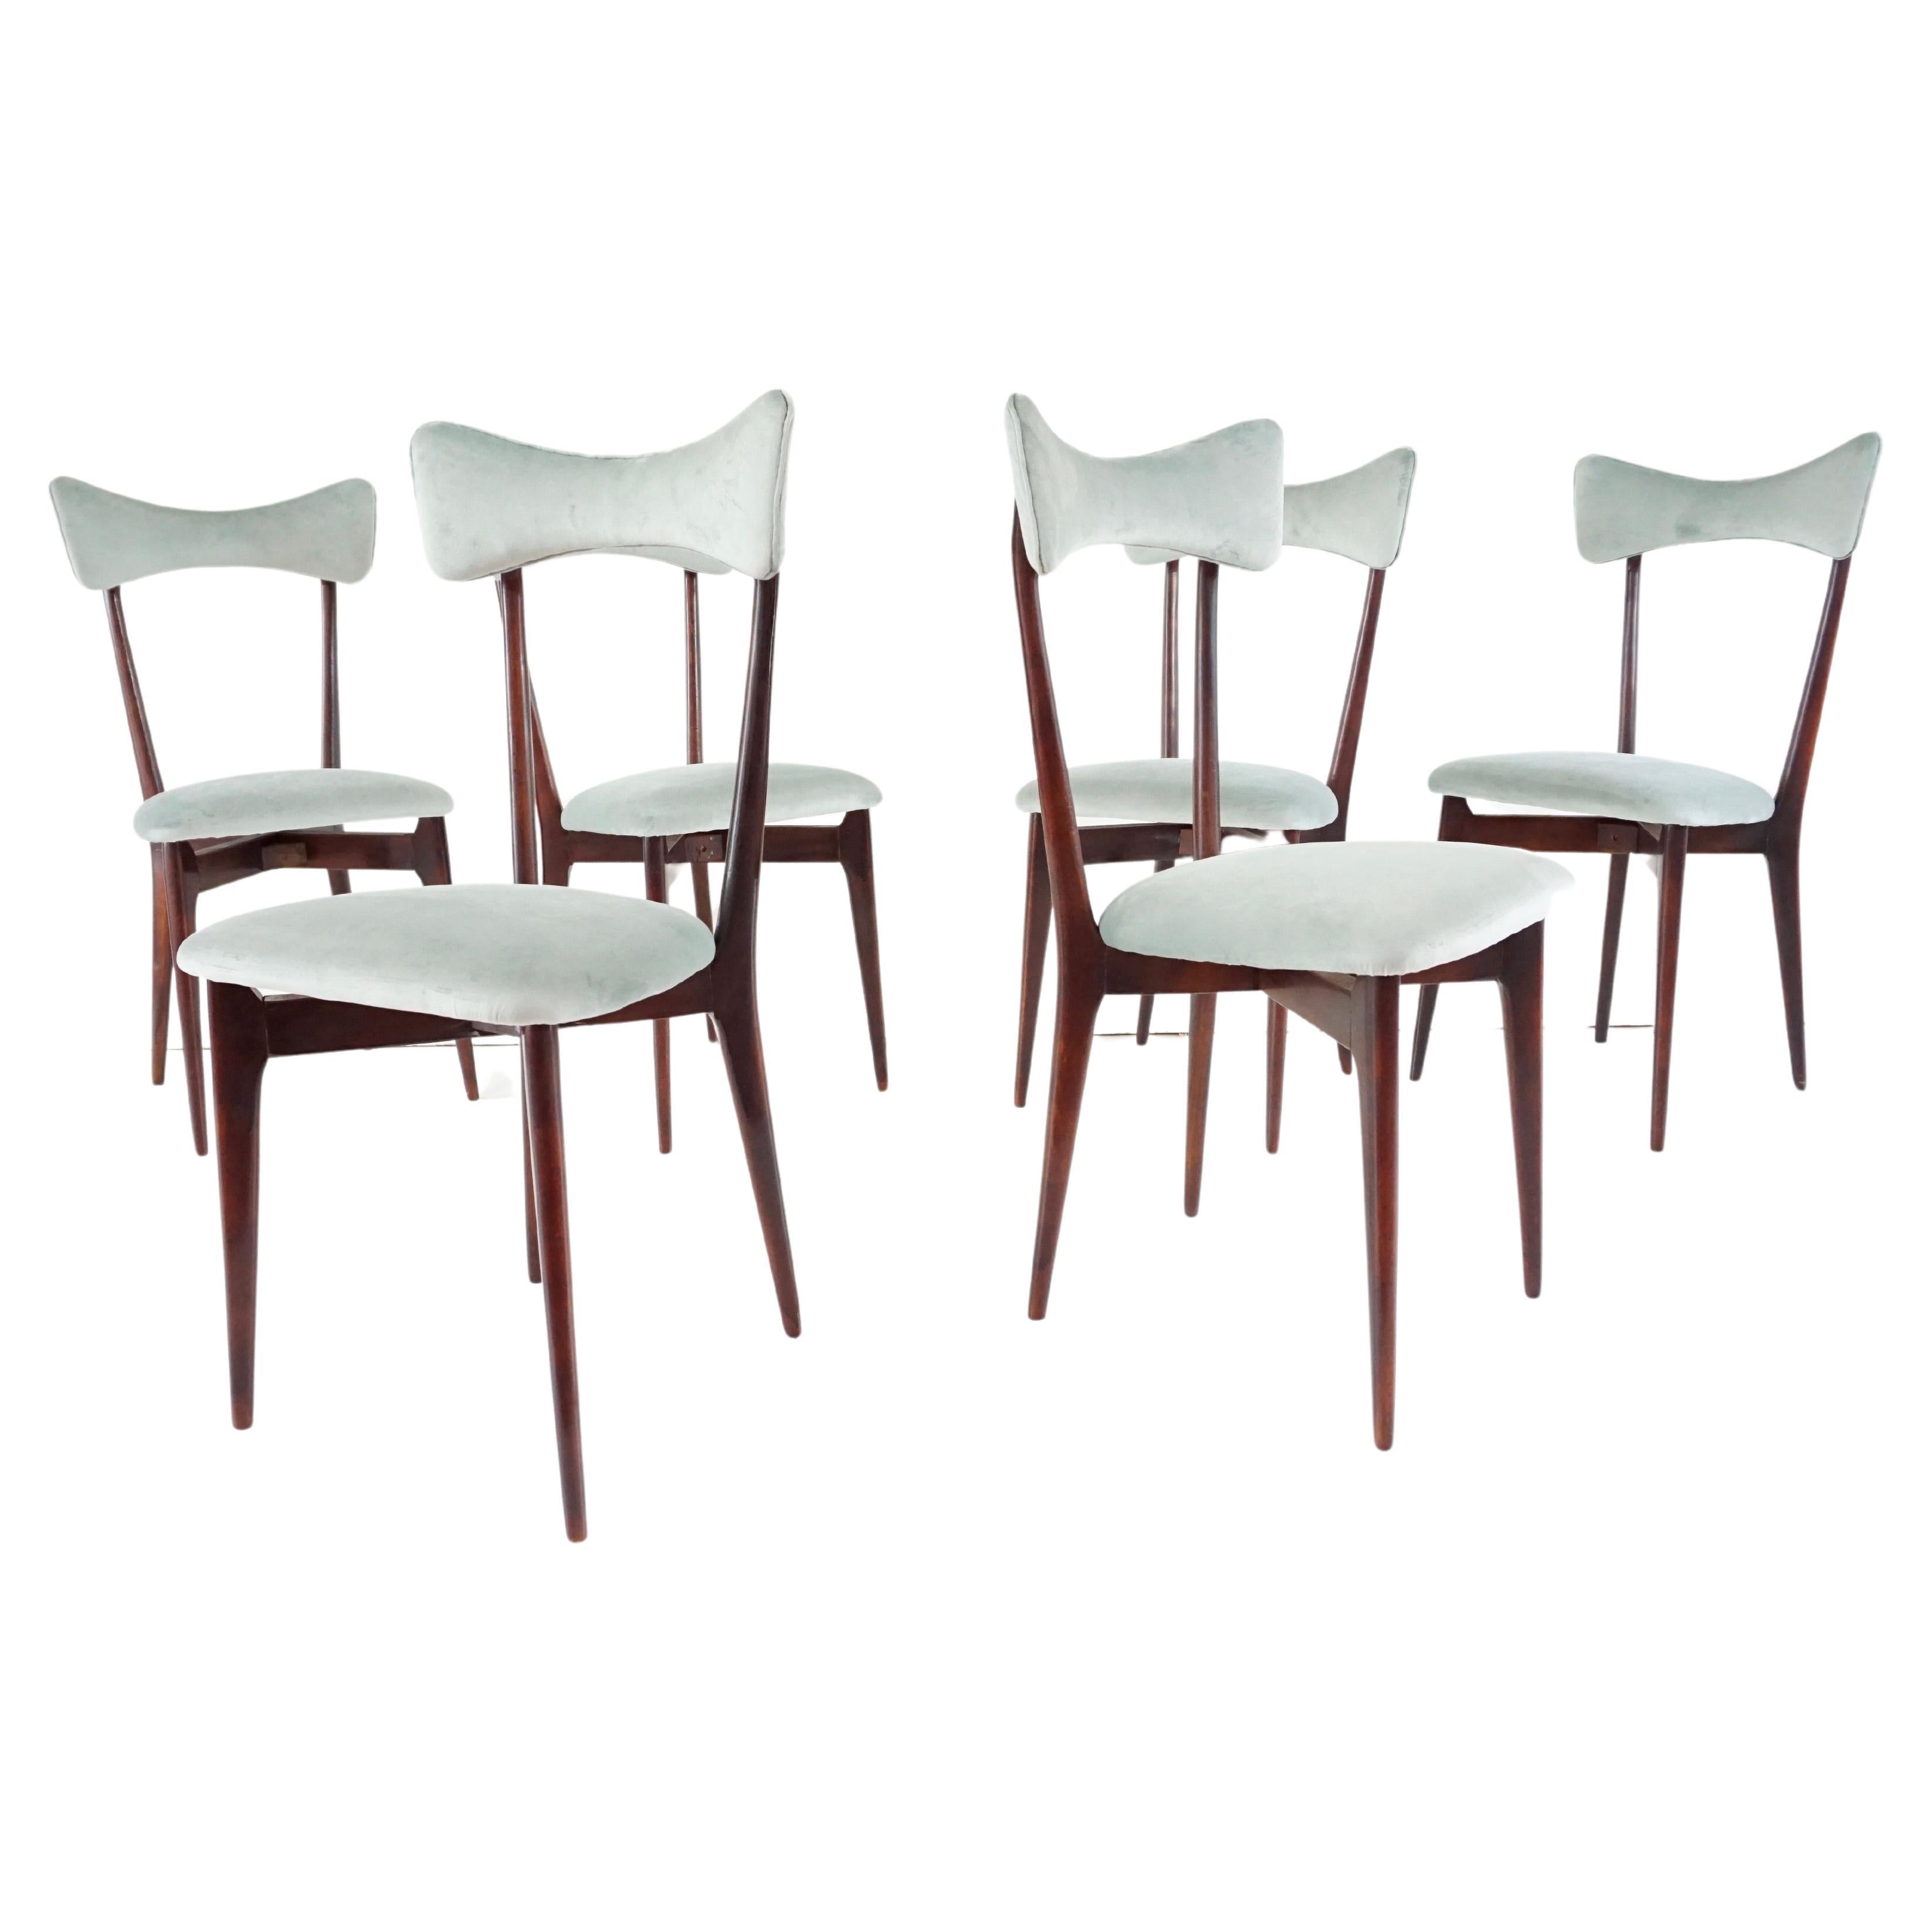 Set of Six Ico and Luisa Parisi Dining Chairs by Ariberto Colombo, 1952 For Sale